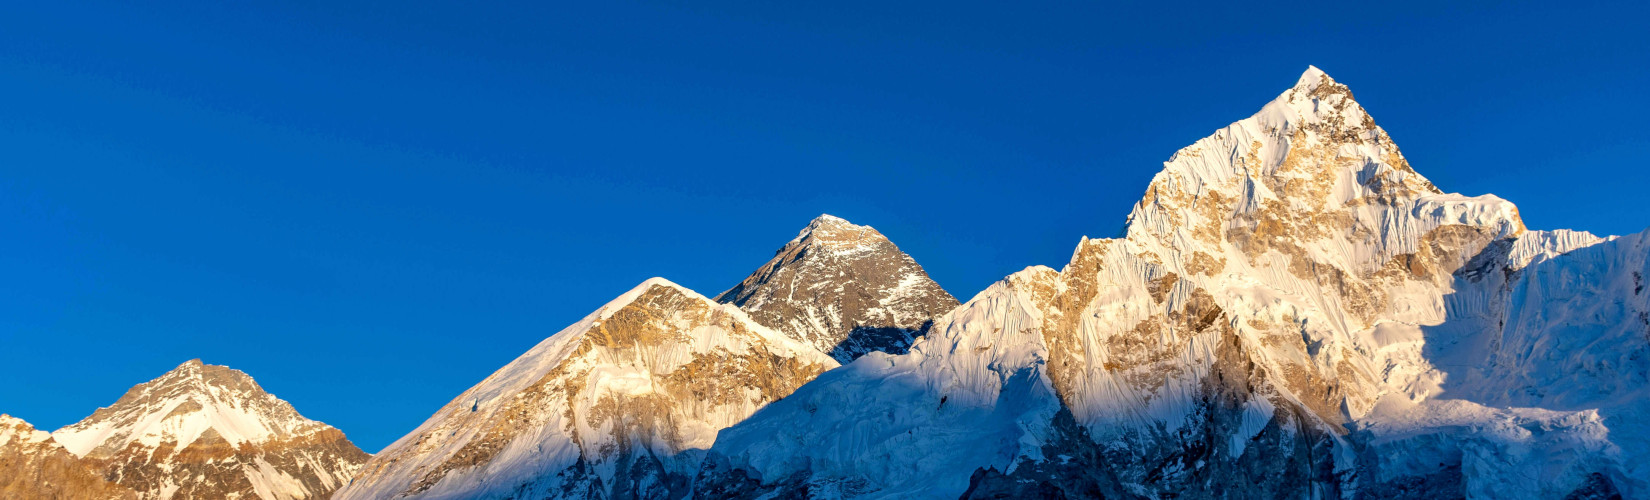 A Complete Guide on Climbing Peaks in Nepal